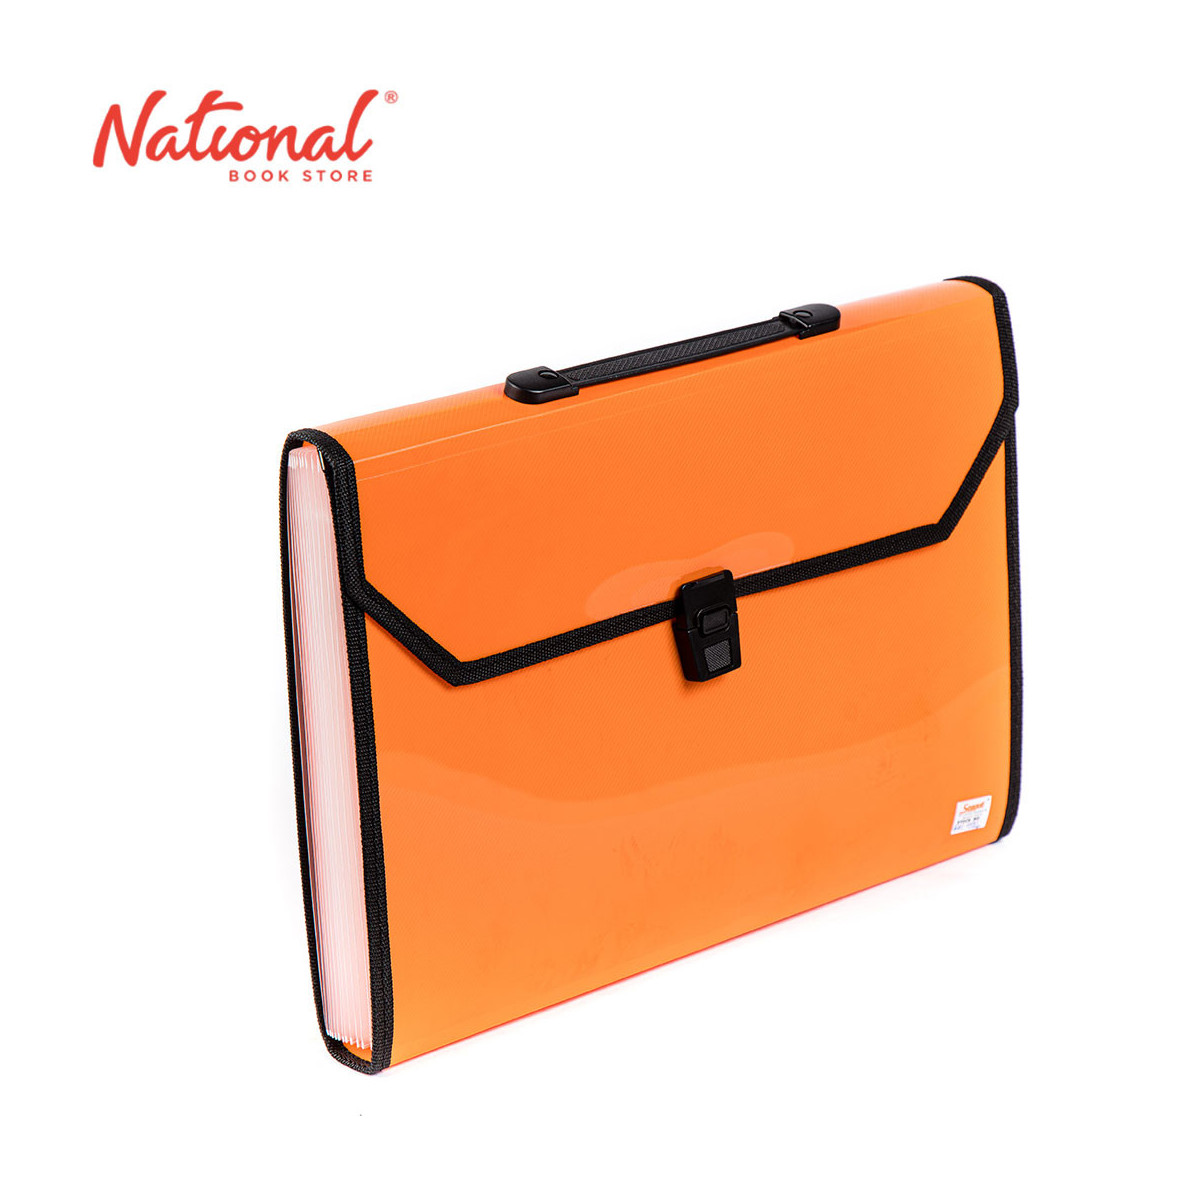 Seagull Expanding File with Handle Long 12 Pockets Push Lock with Tab Black Lining B4301 Orange